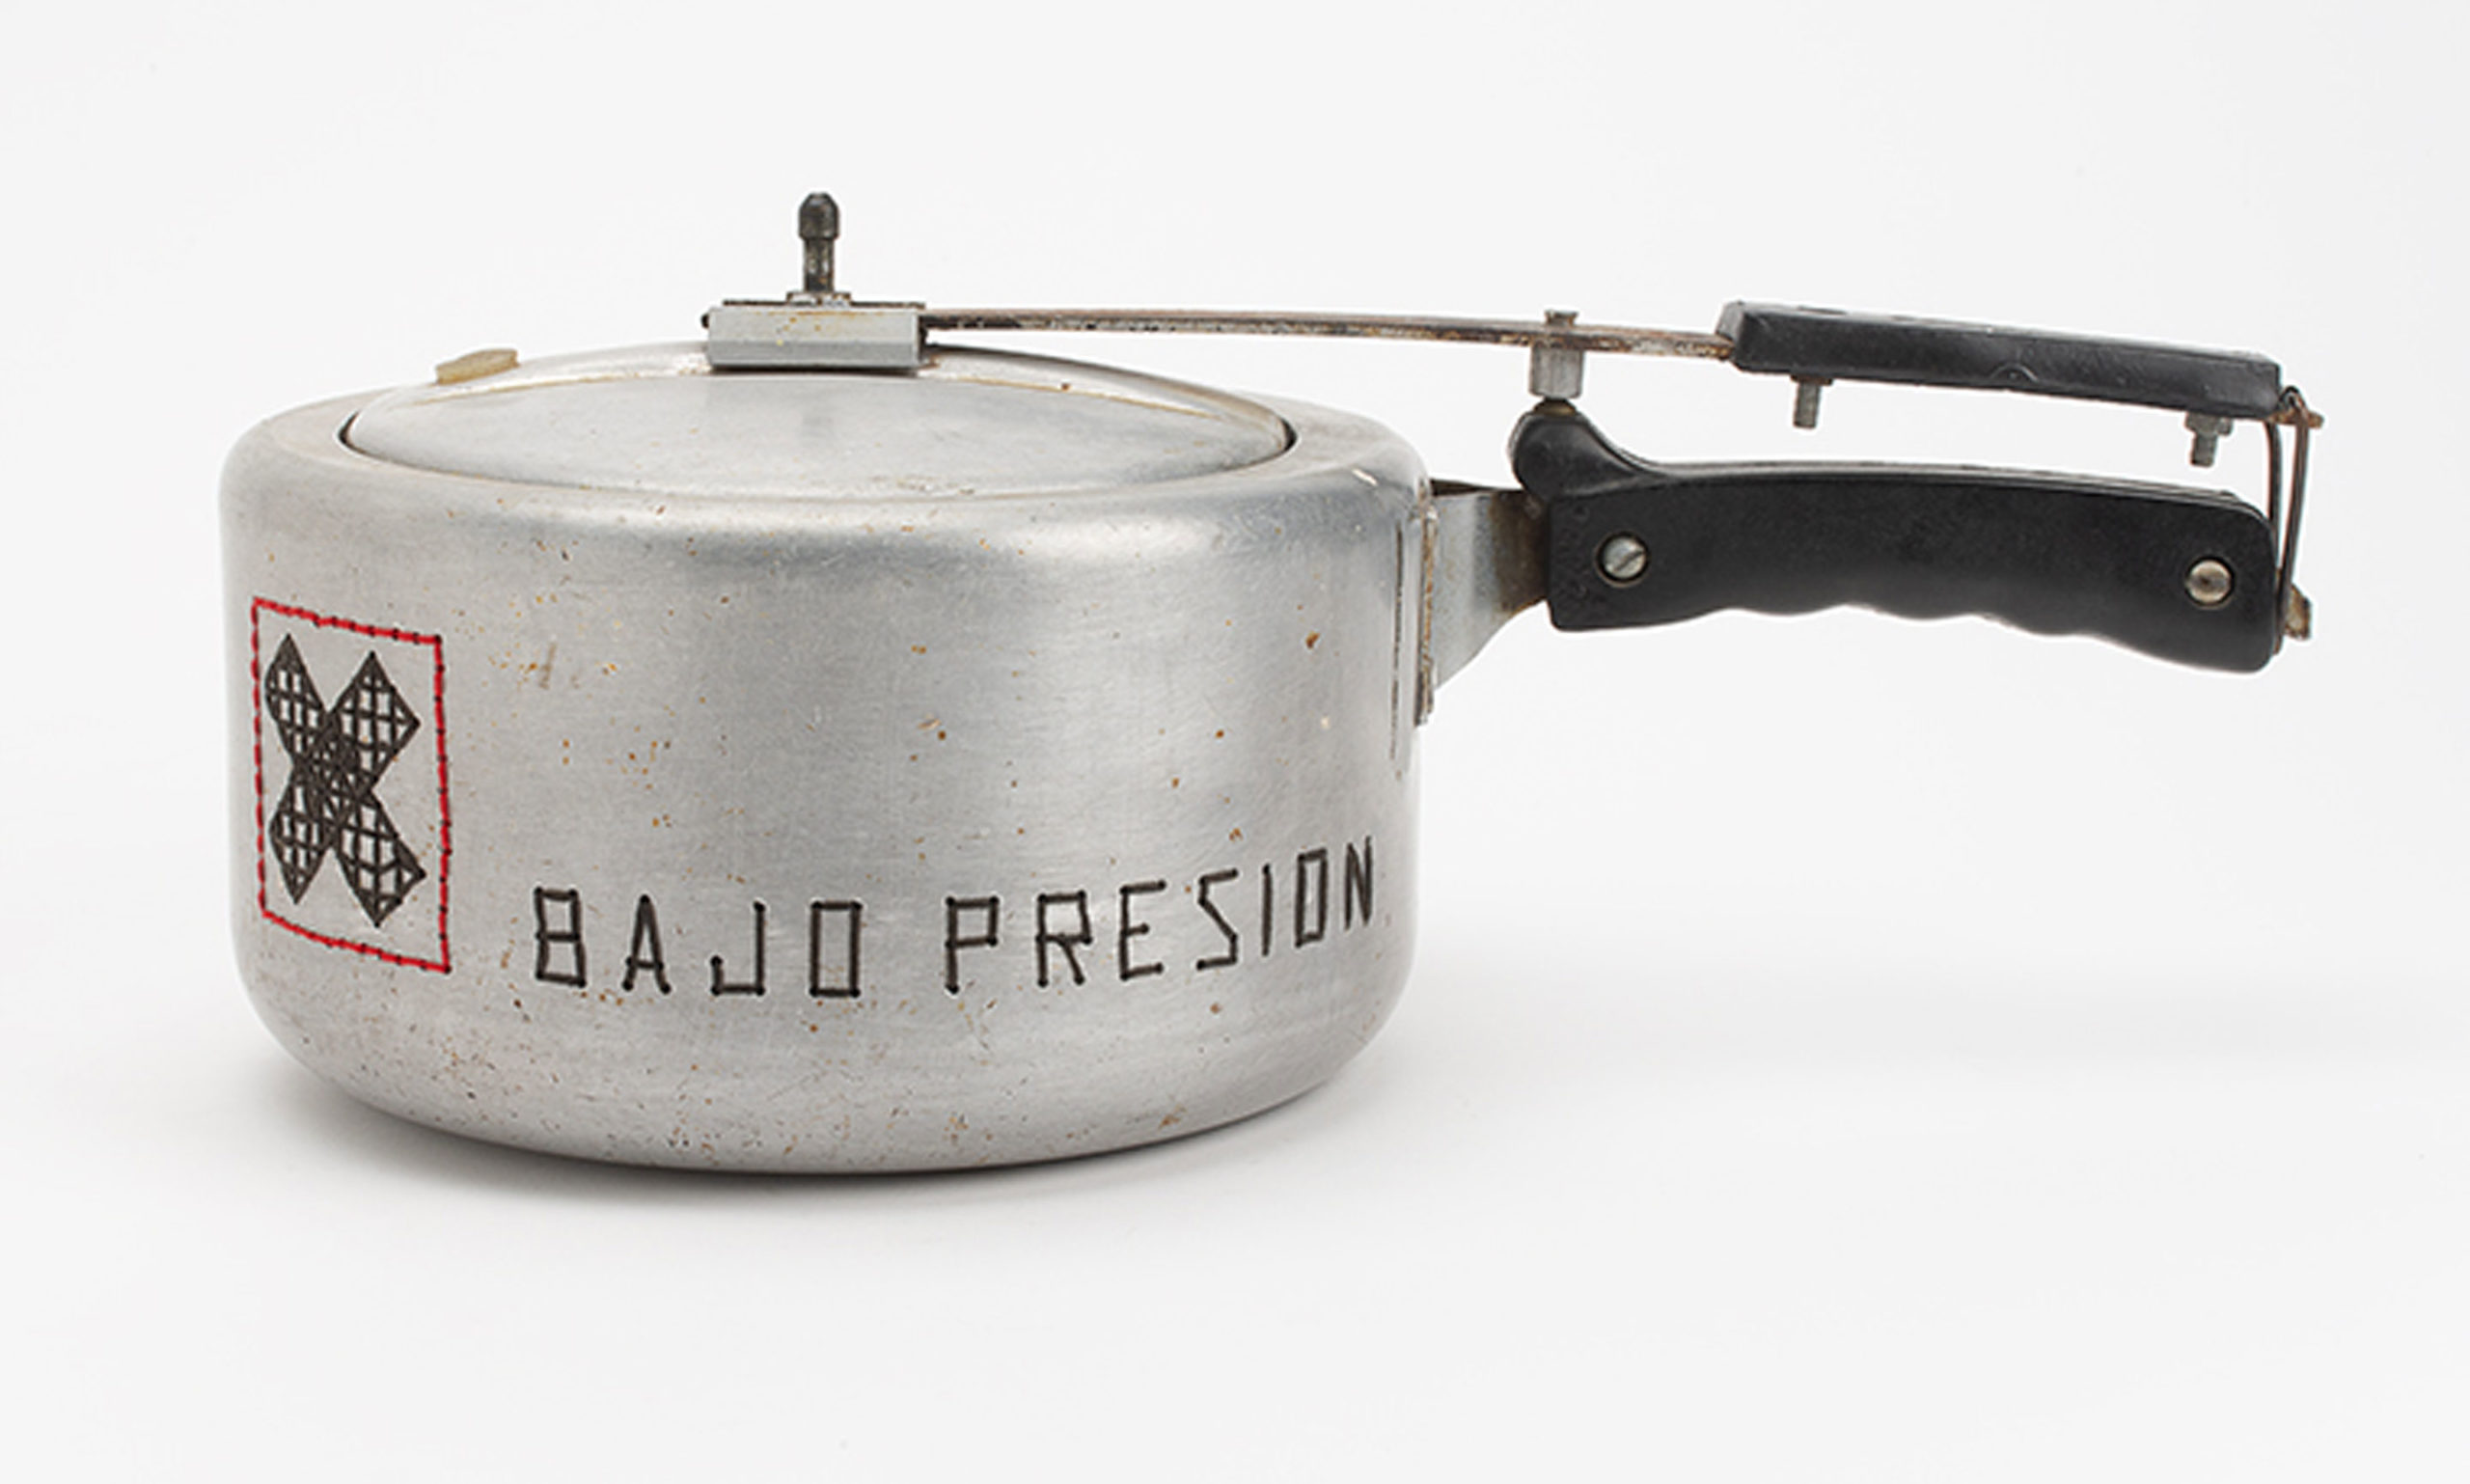 Aimée García Marrero, Bajo presión, 2002. Pressure cooker with embroidery thread. Collection of ASU Art Museum. Purchased with the funds provided by The FUNd at Arizona State University Art Museum. Photography by Craig Smith.